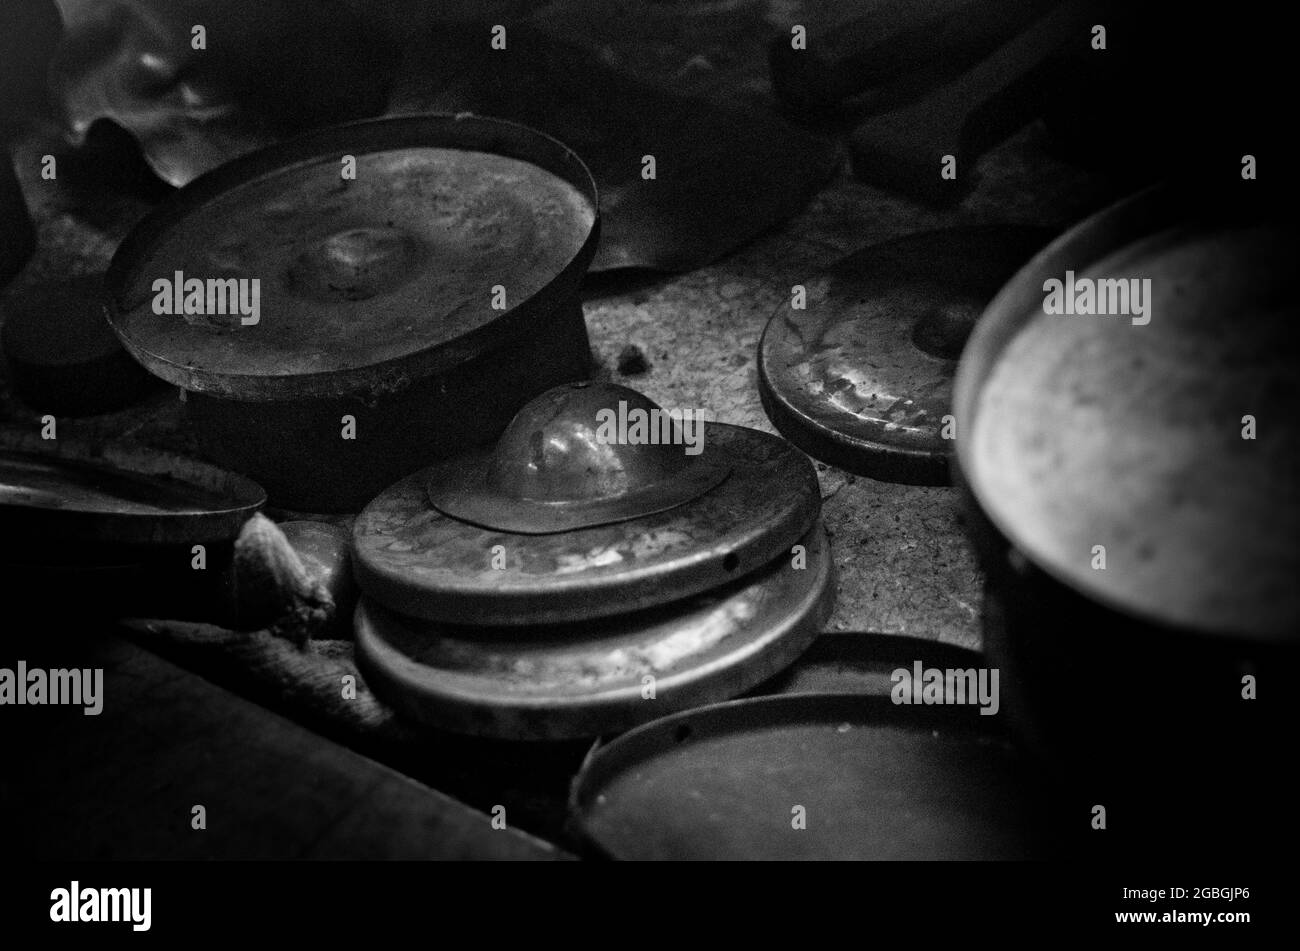 Stack of unfinished gong materials Stock Photo